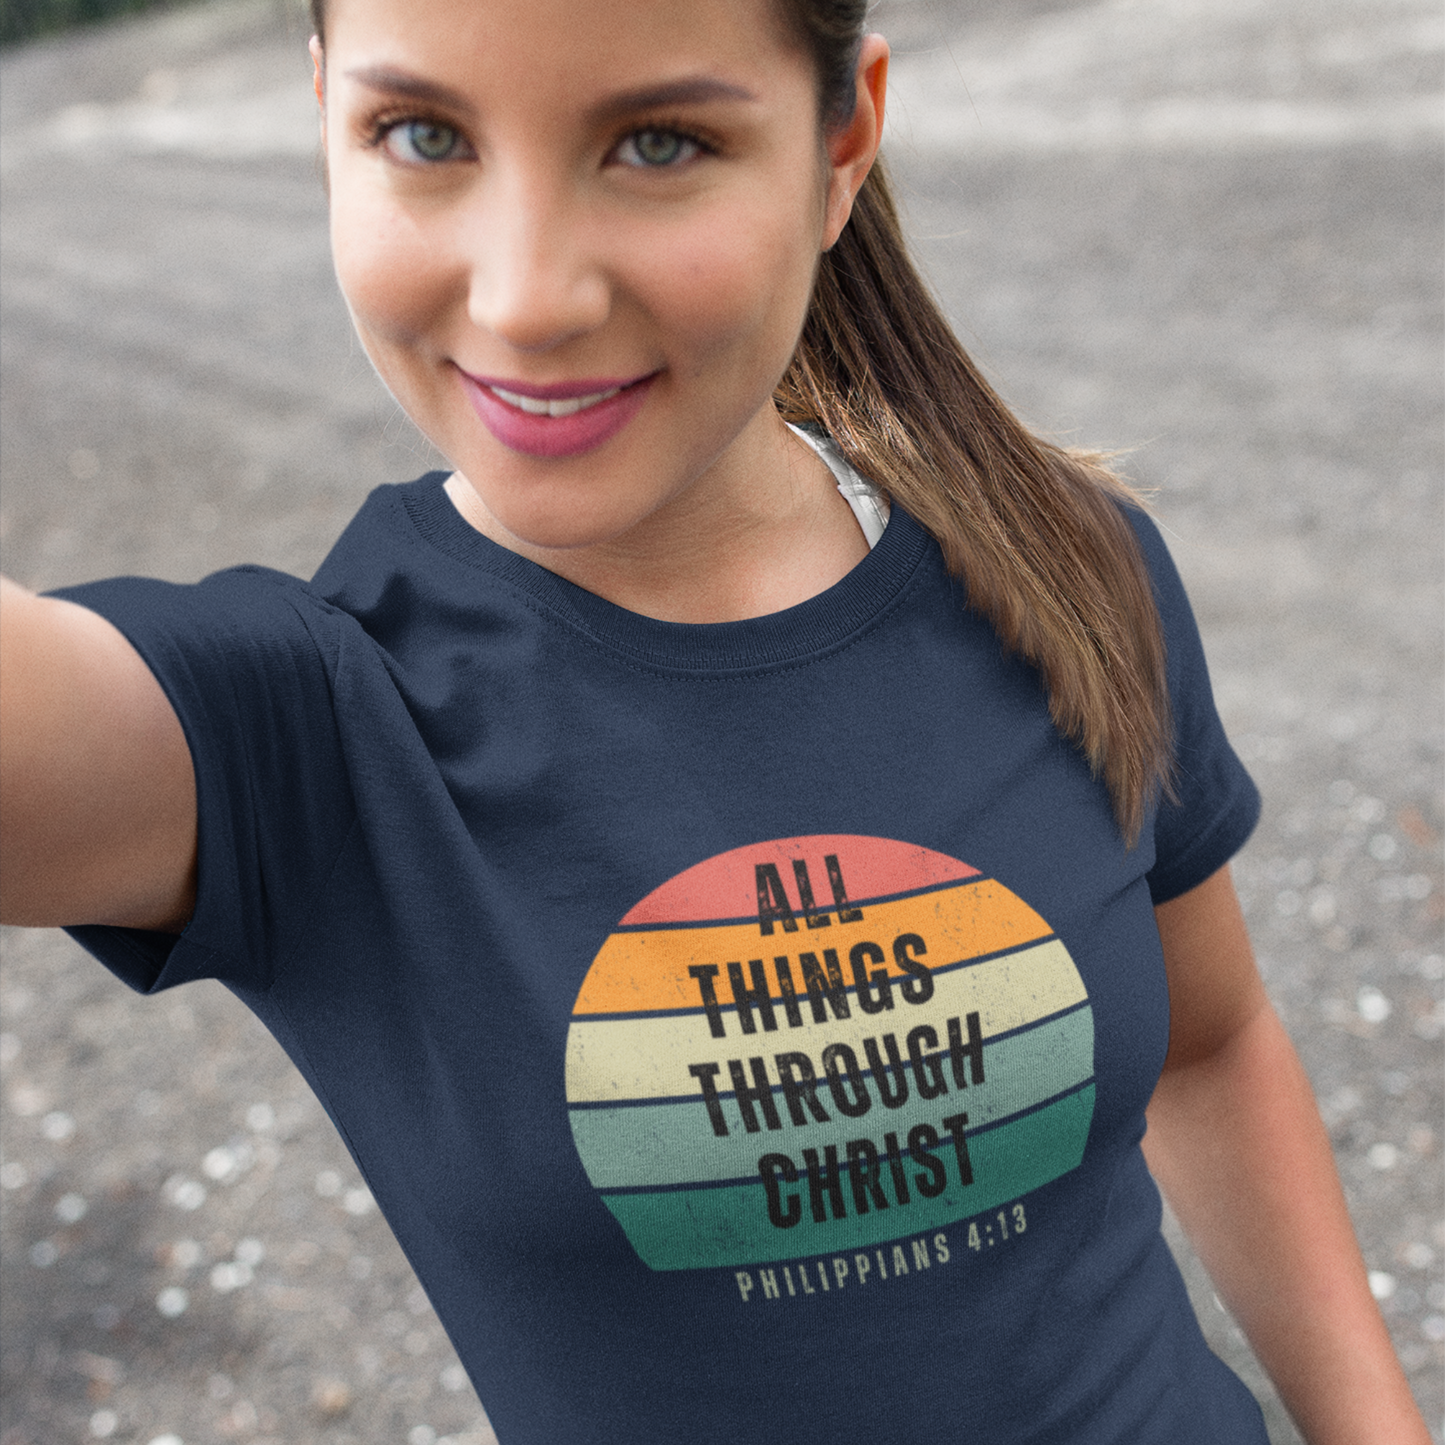 Women's Softstyle Tee, All Things Through Christ T-Shirt, I Can Do All Things Through Christ, Philippians 4:13, Religious Gift, Christian Apparel, Christian Tshirt, LDS Girls Camp Shirt